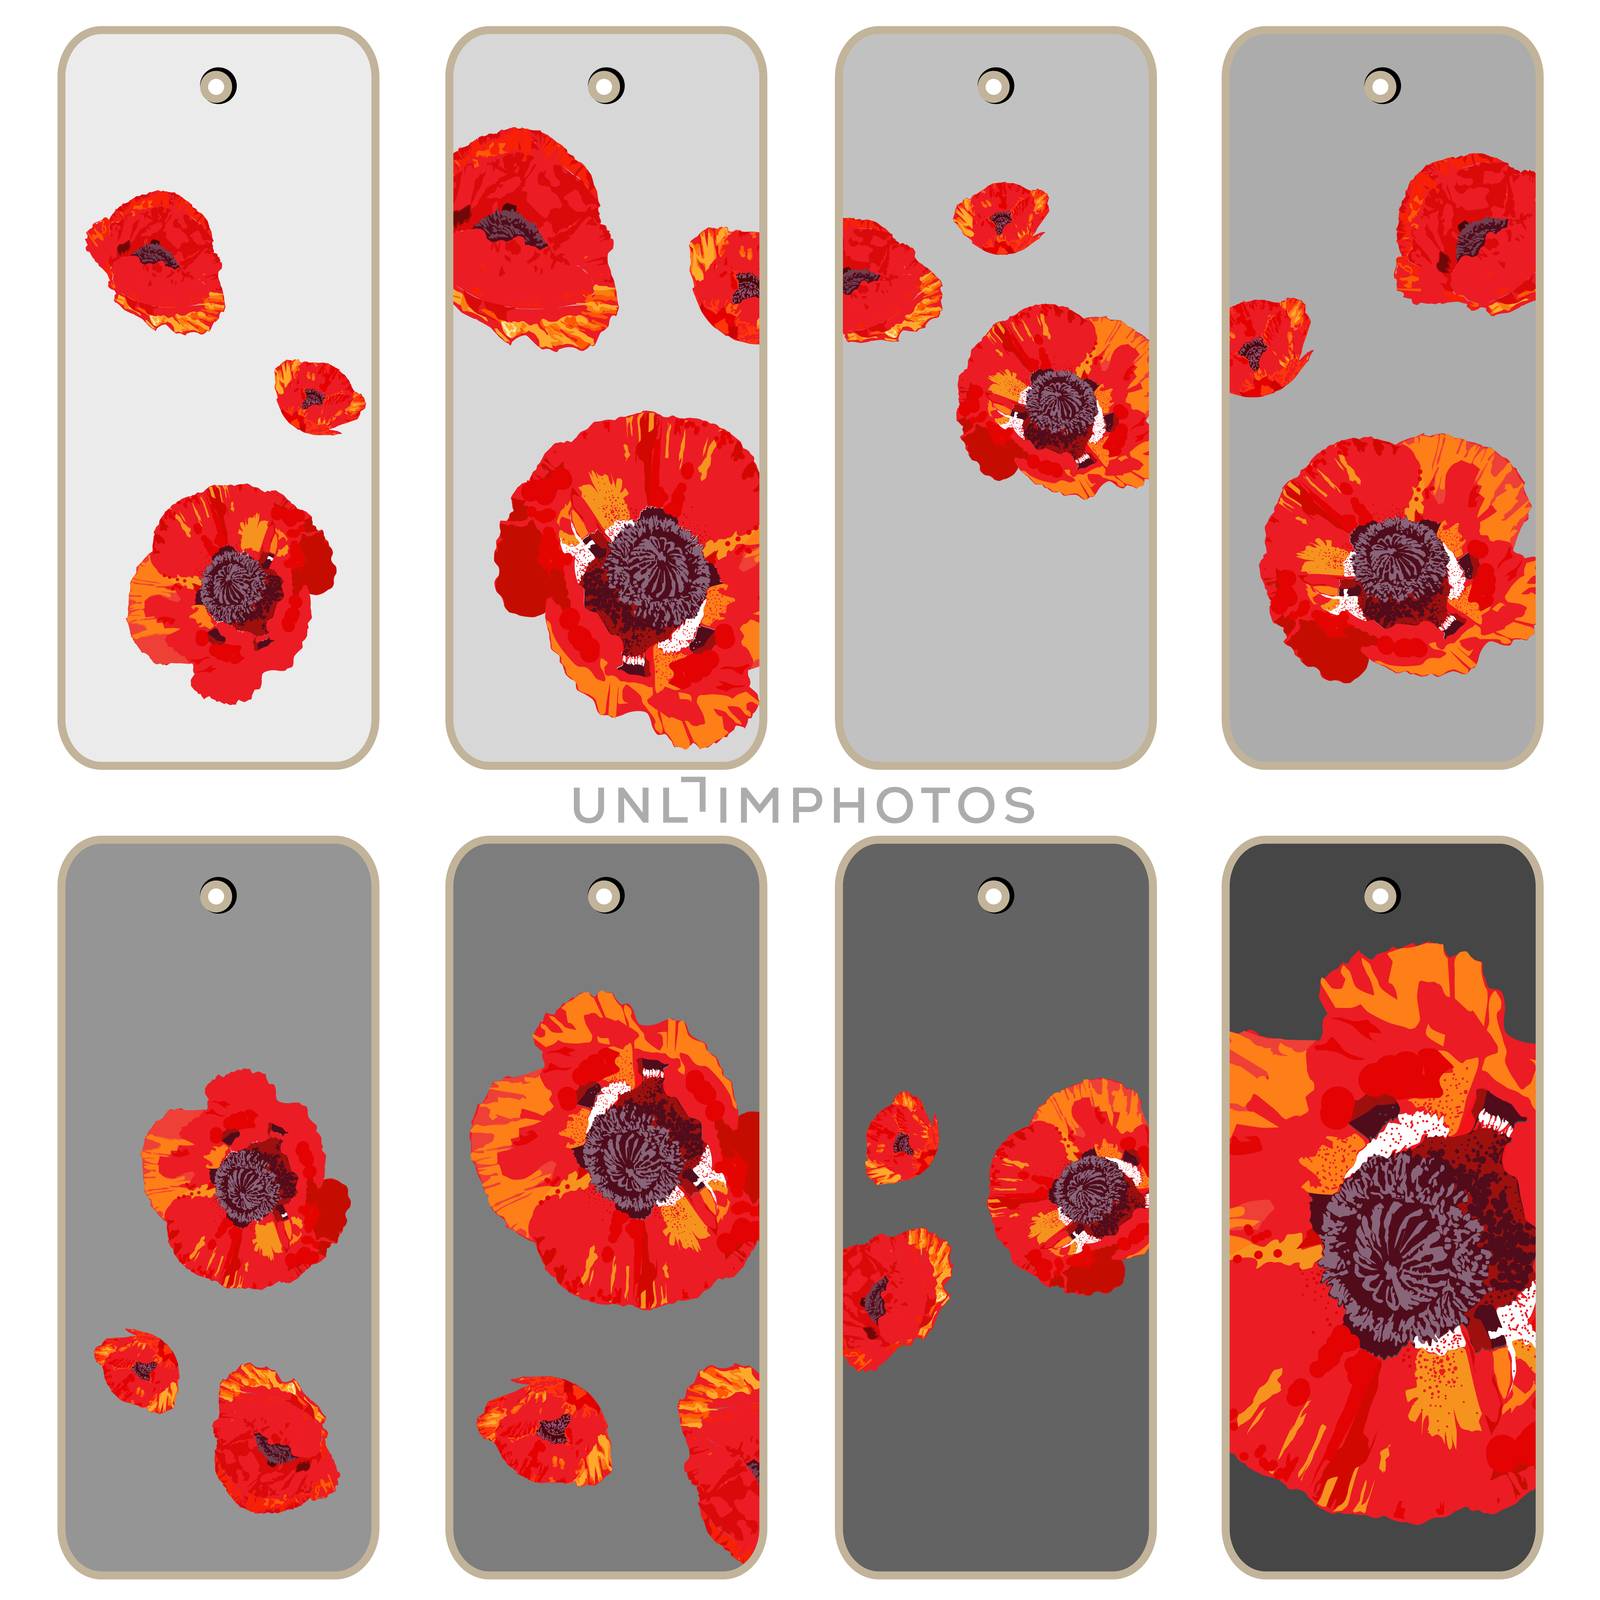 poppies price tags by catacos